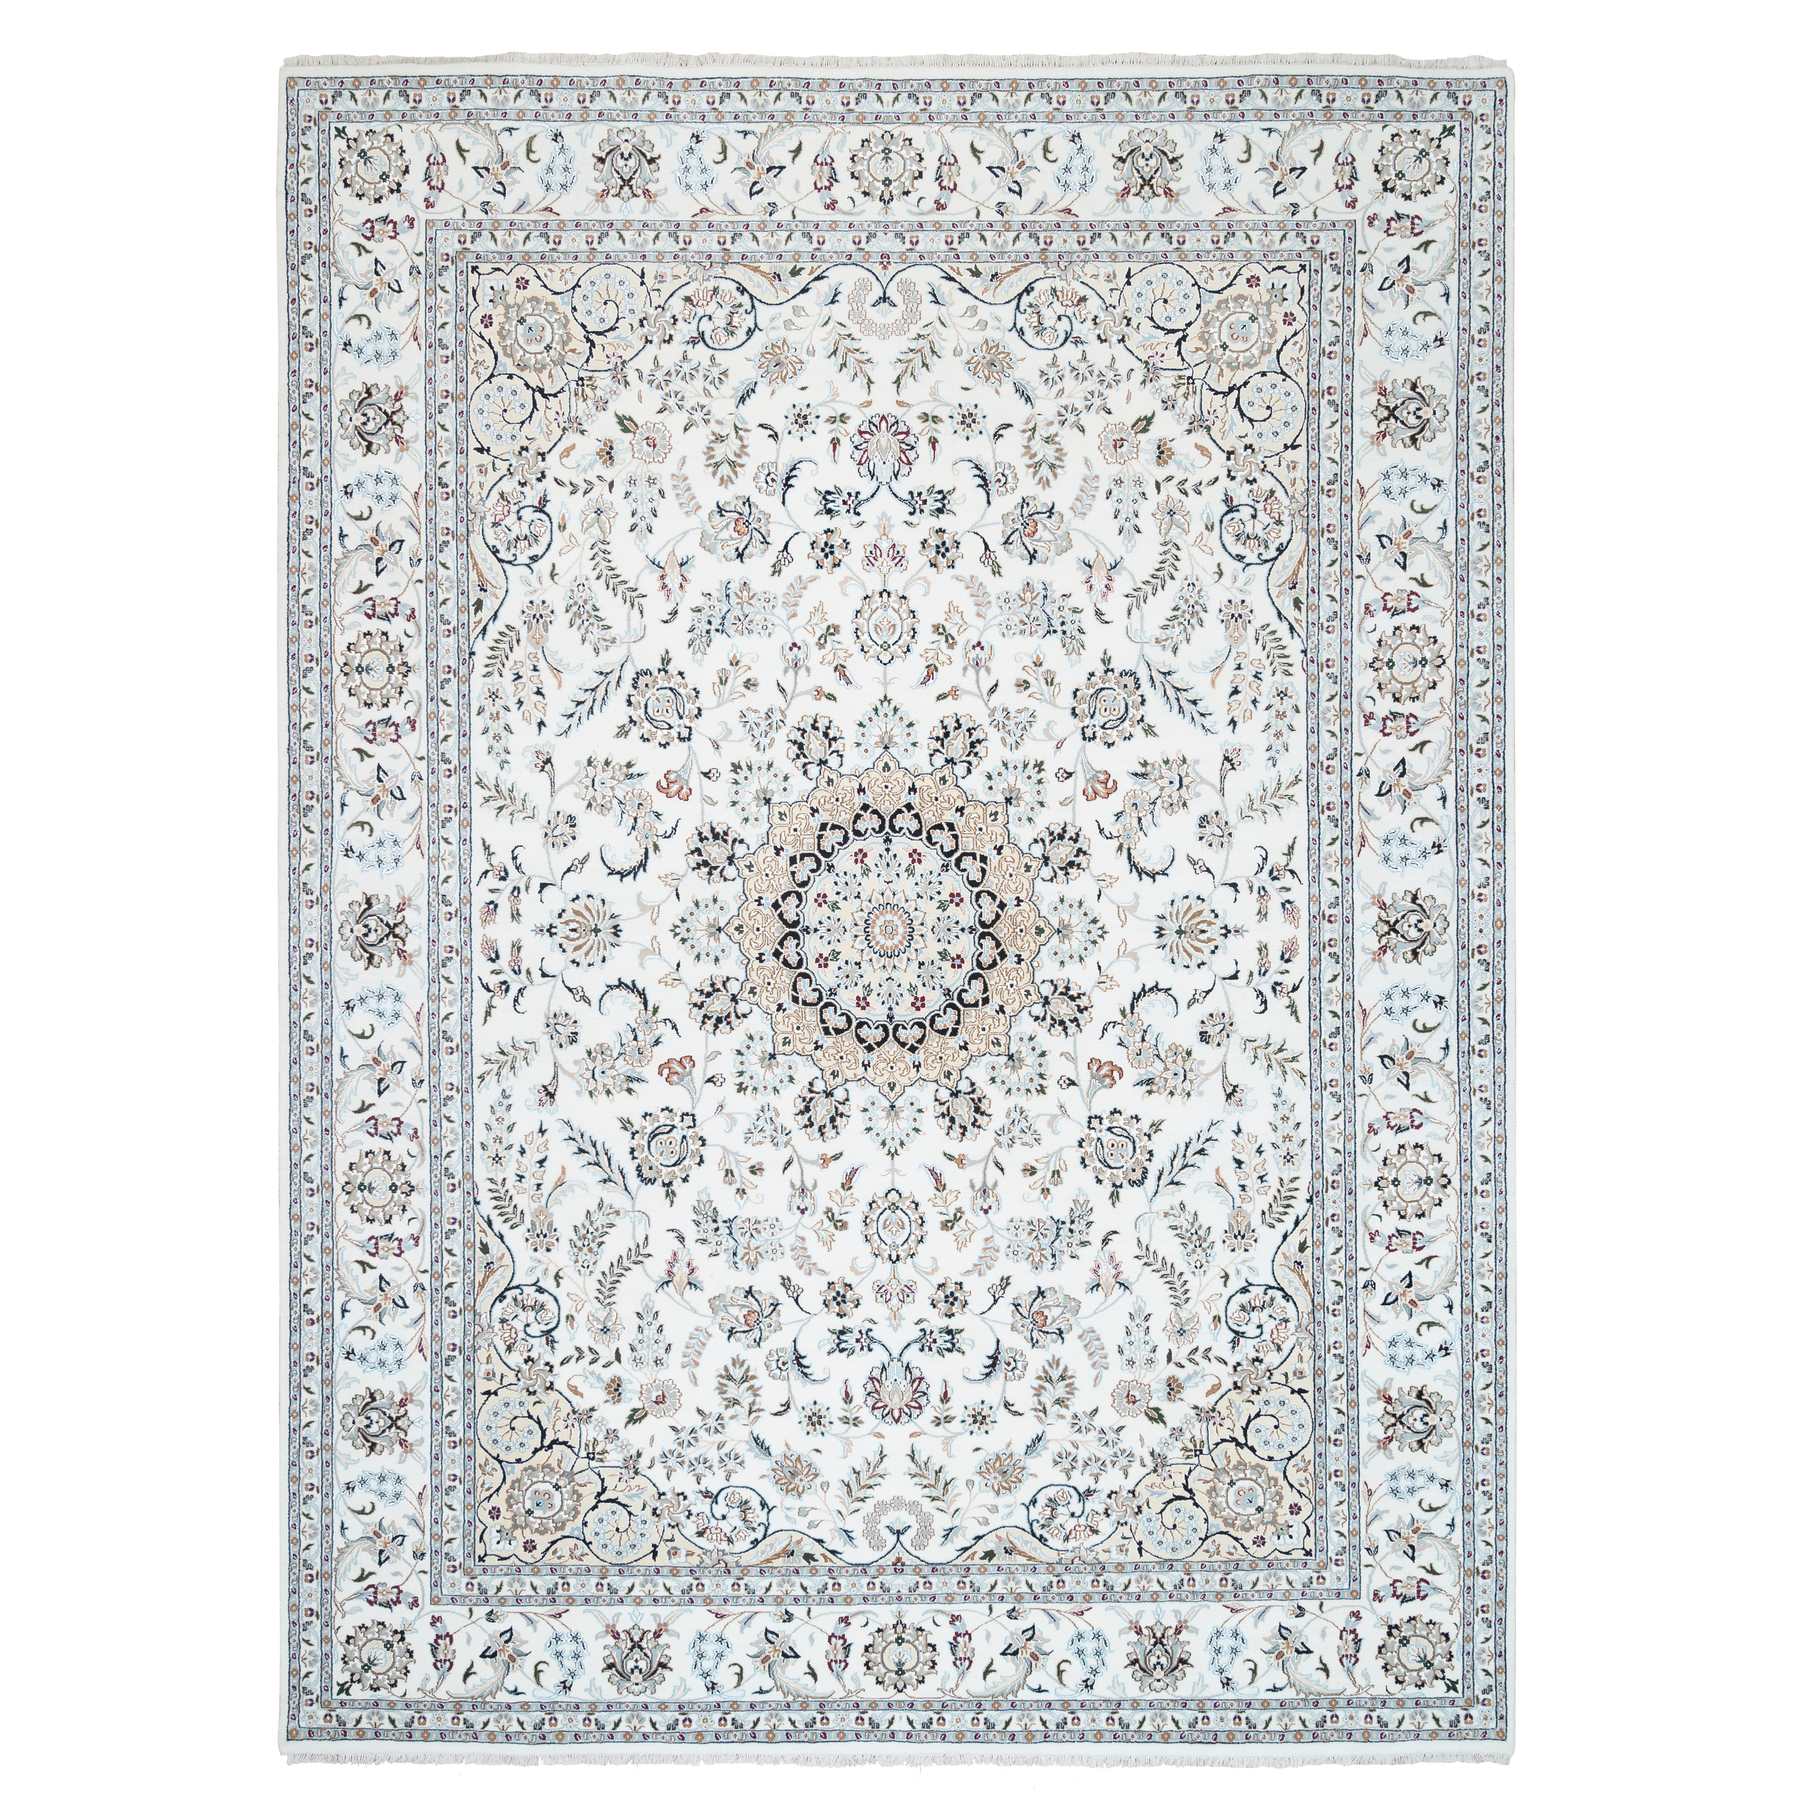 9'3"x12'4" Ivory Nain with Flower and Medallion Design Wool and Silk 250 KPSI Hand Woven Oriental Rug 